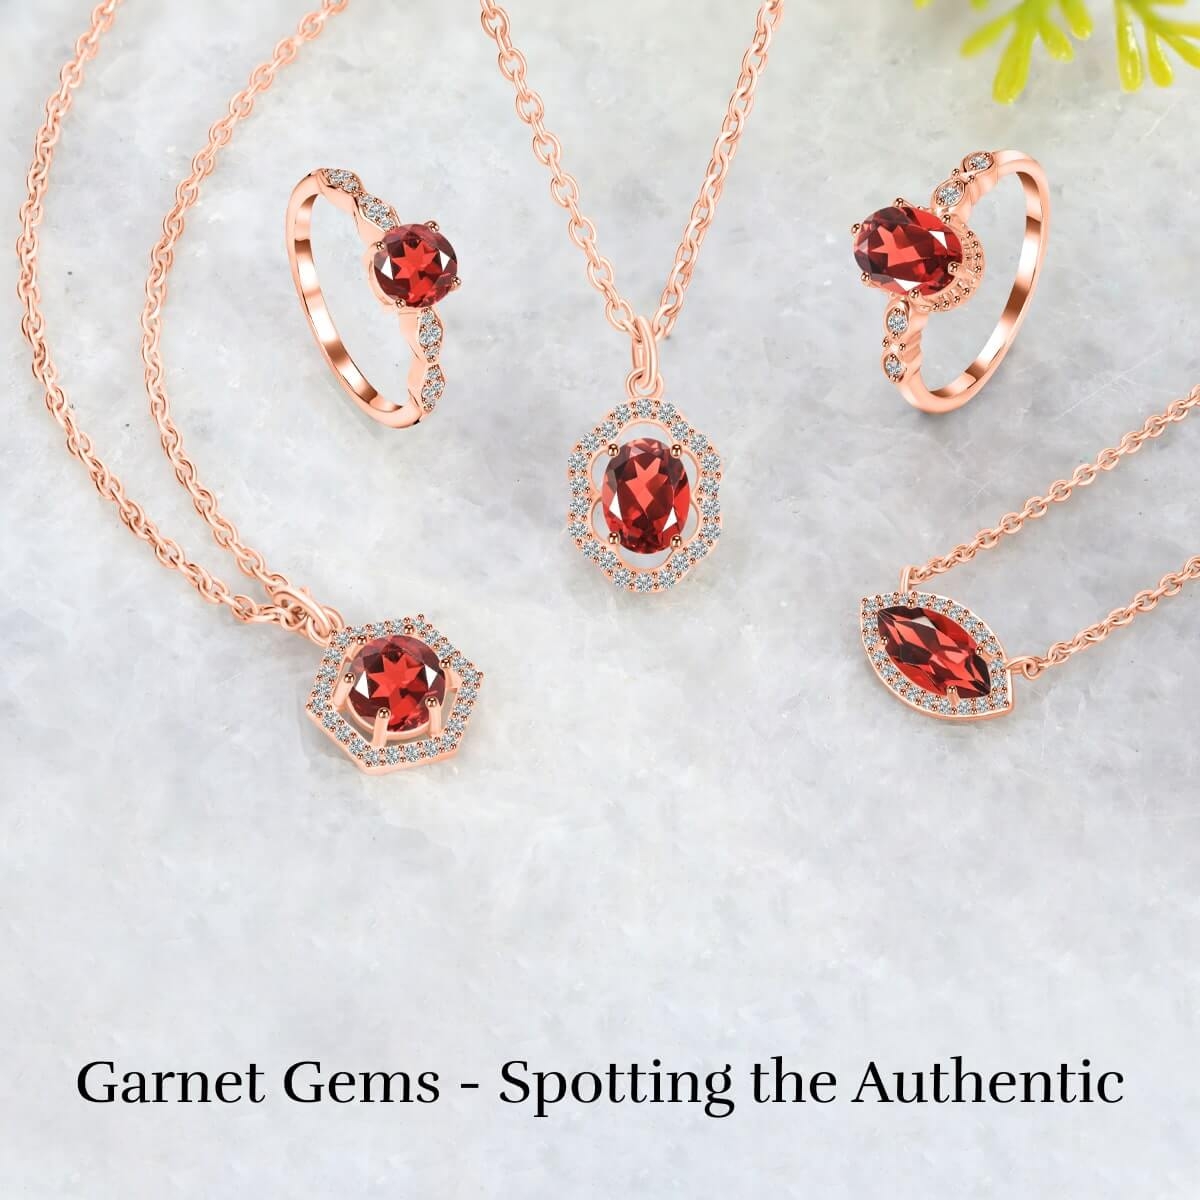 How to Identify If Garnet Gemstone Is Real or Fake